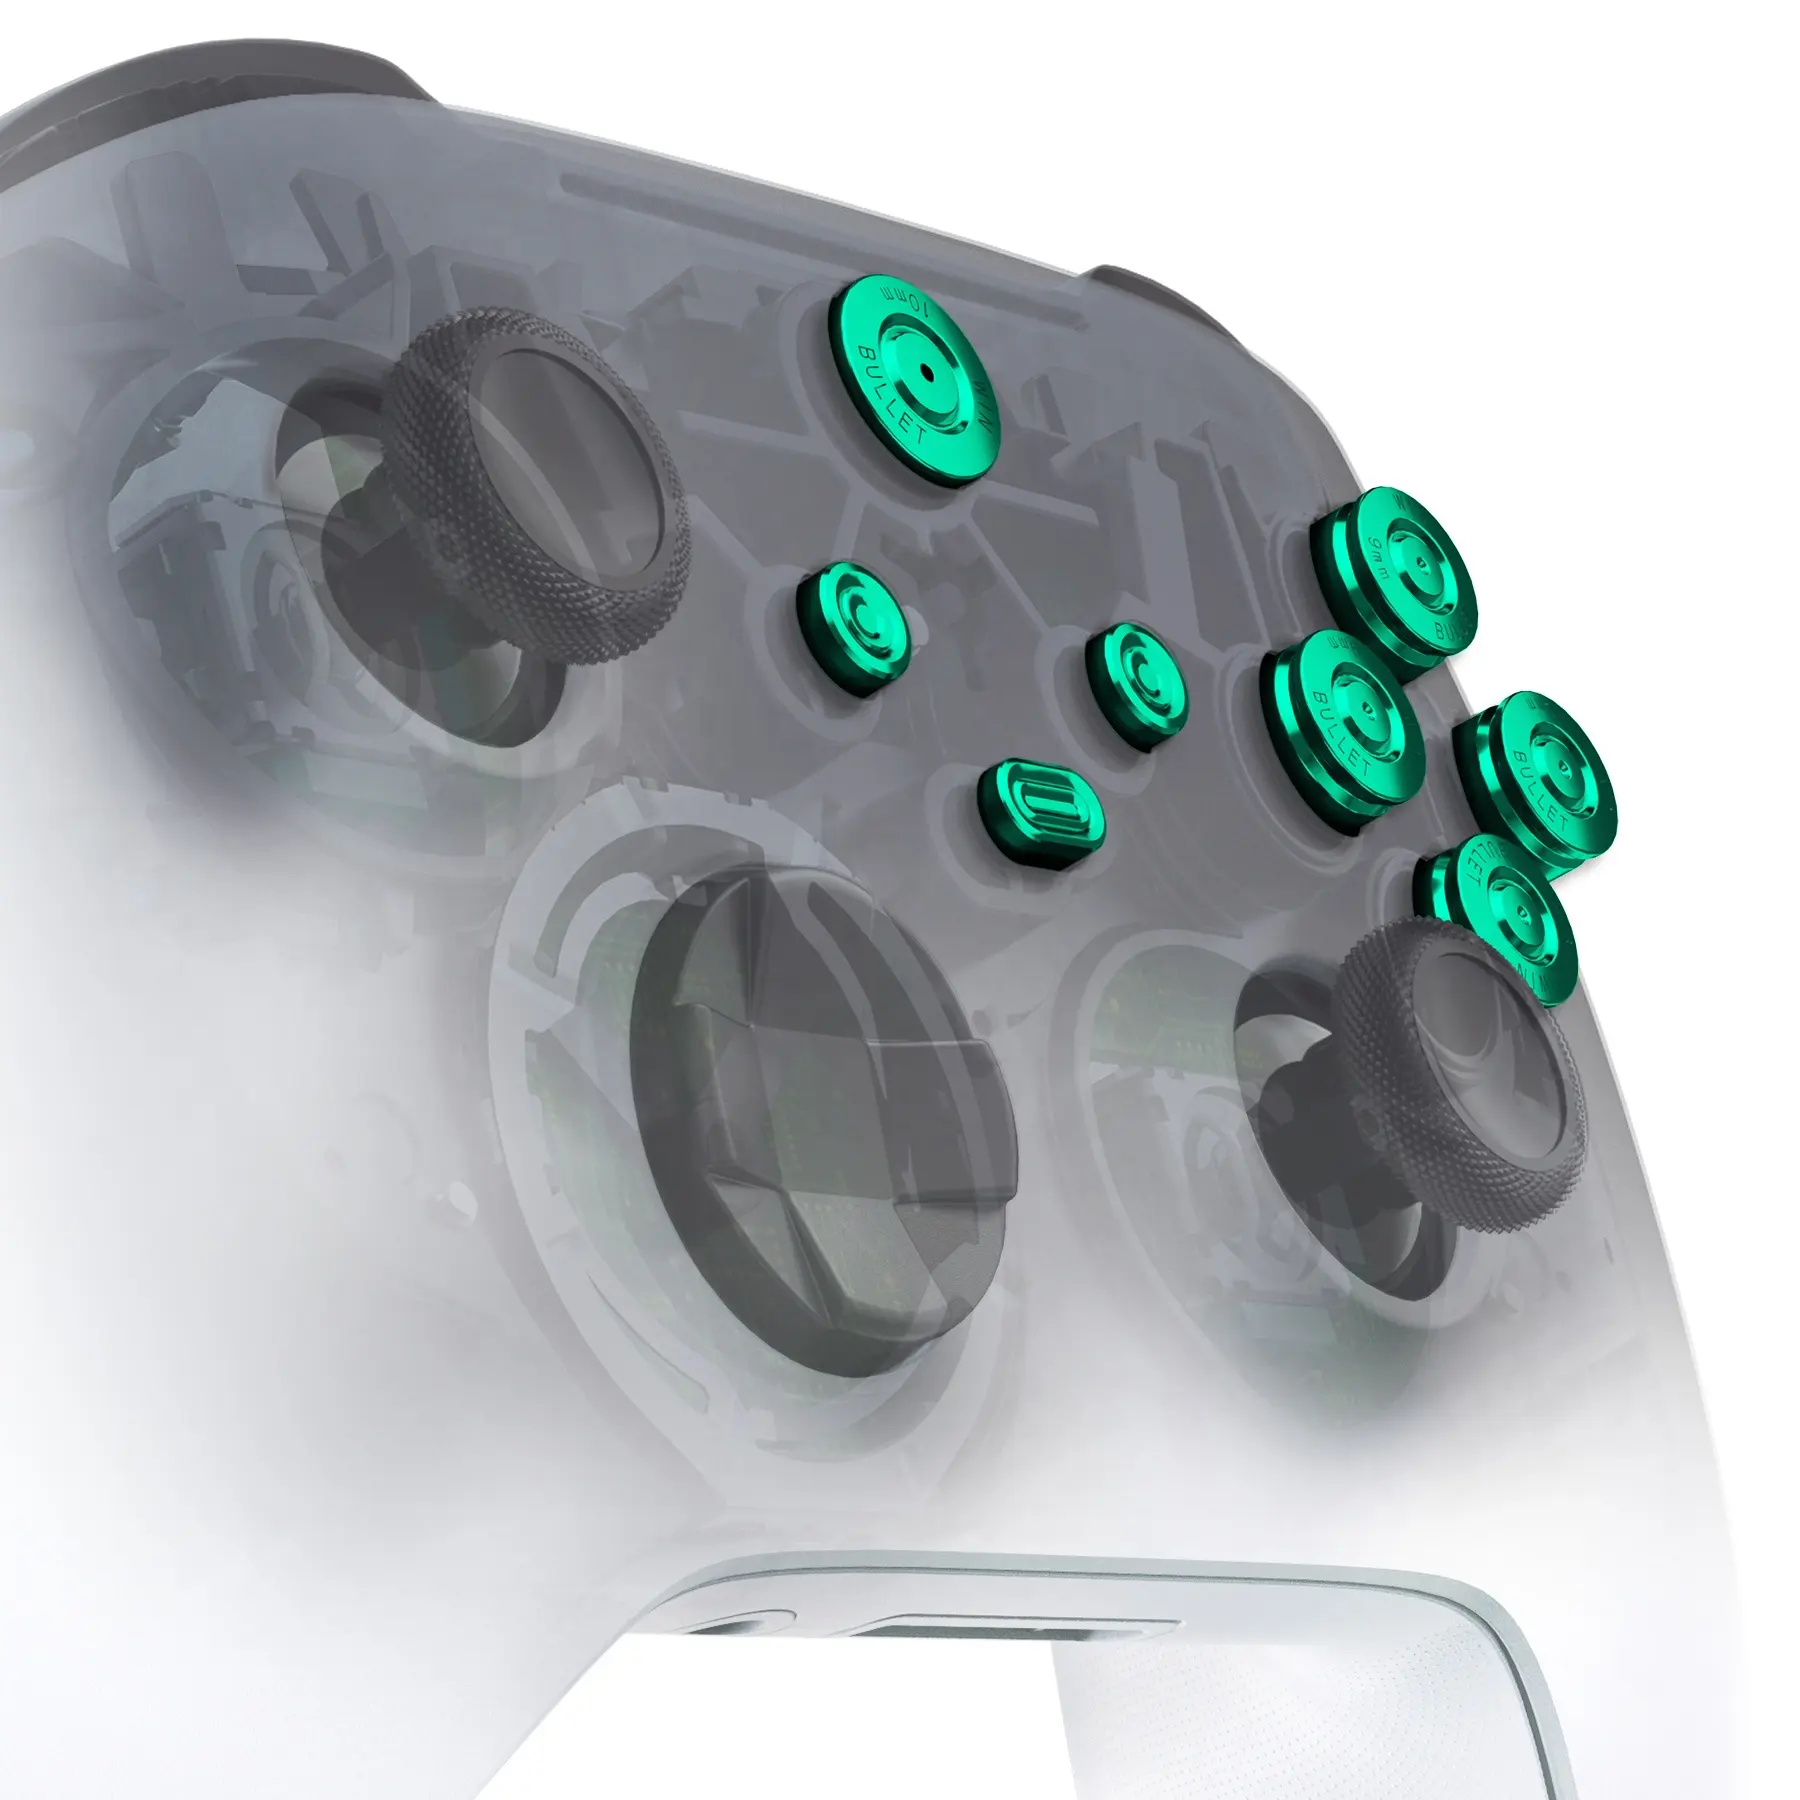 8In1Green eXtremeRate Metal Abxy Home Start Back Share Buttons For Xbox Series X S Controller Gamepad Game Accessories